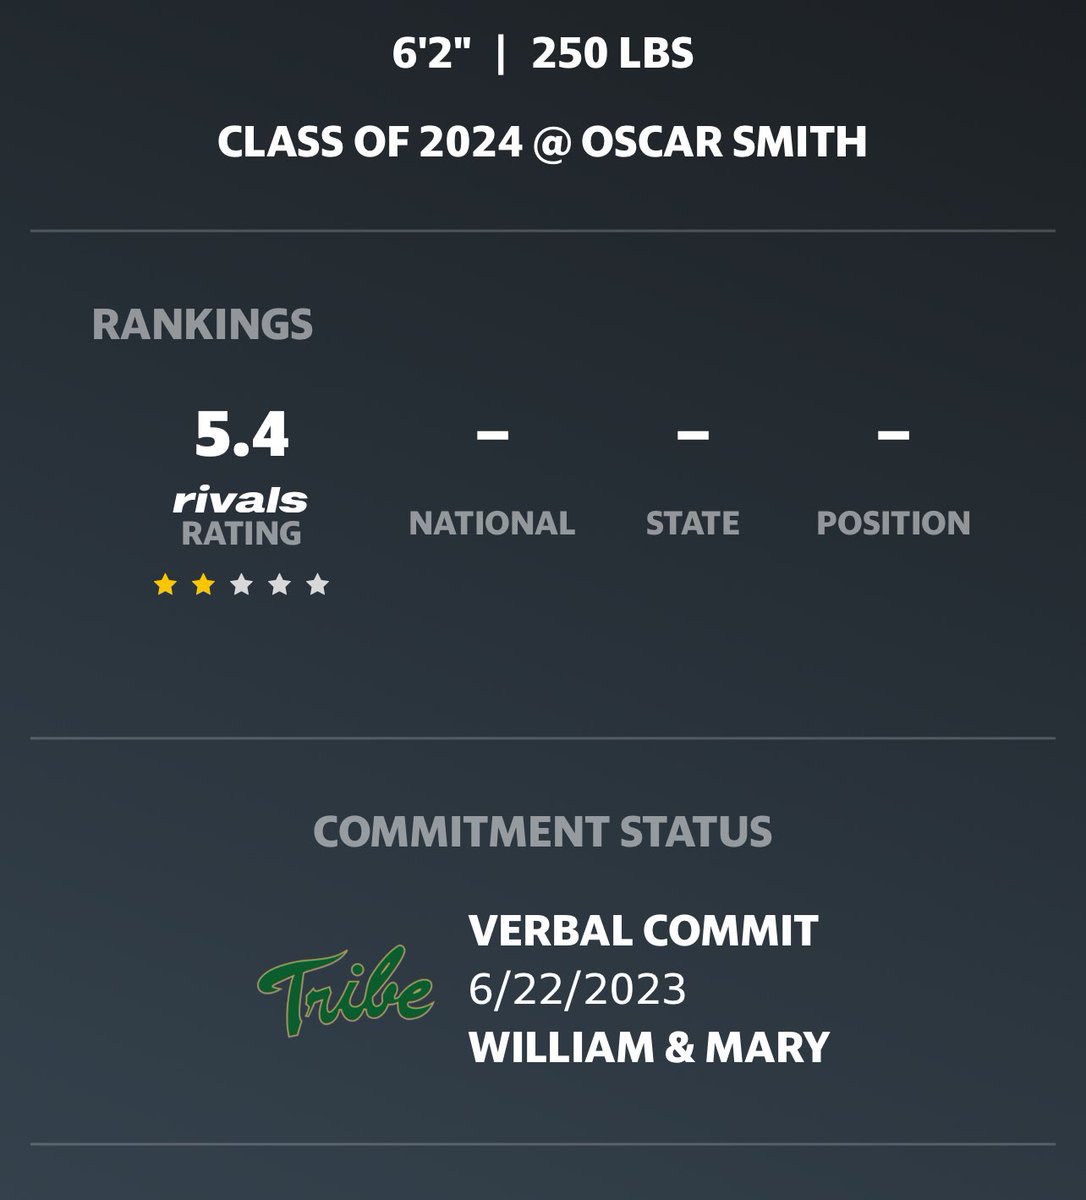 Extremely honored to be rated as a 2 star recruit by rivals!